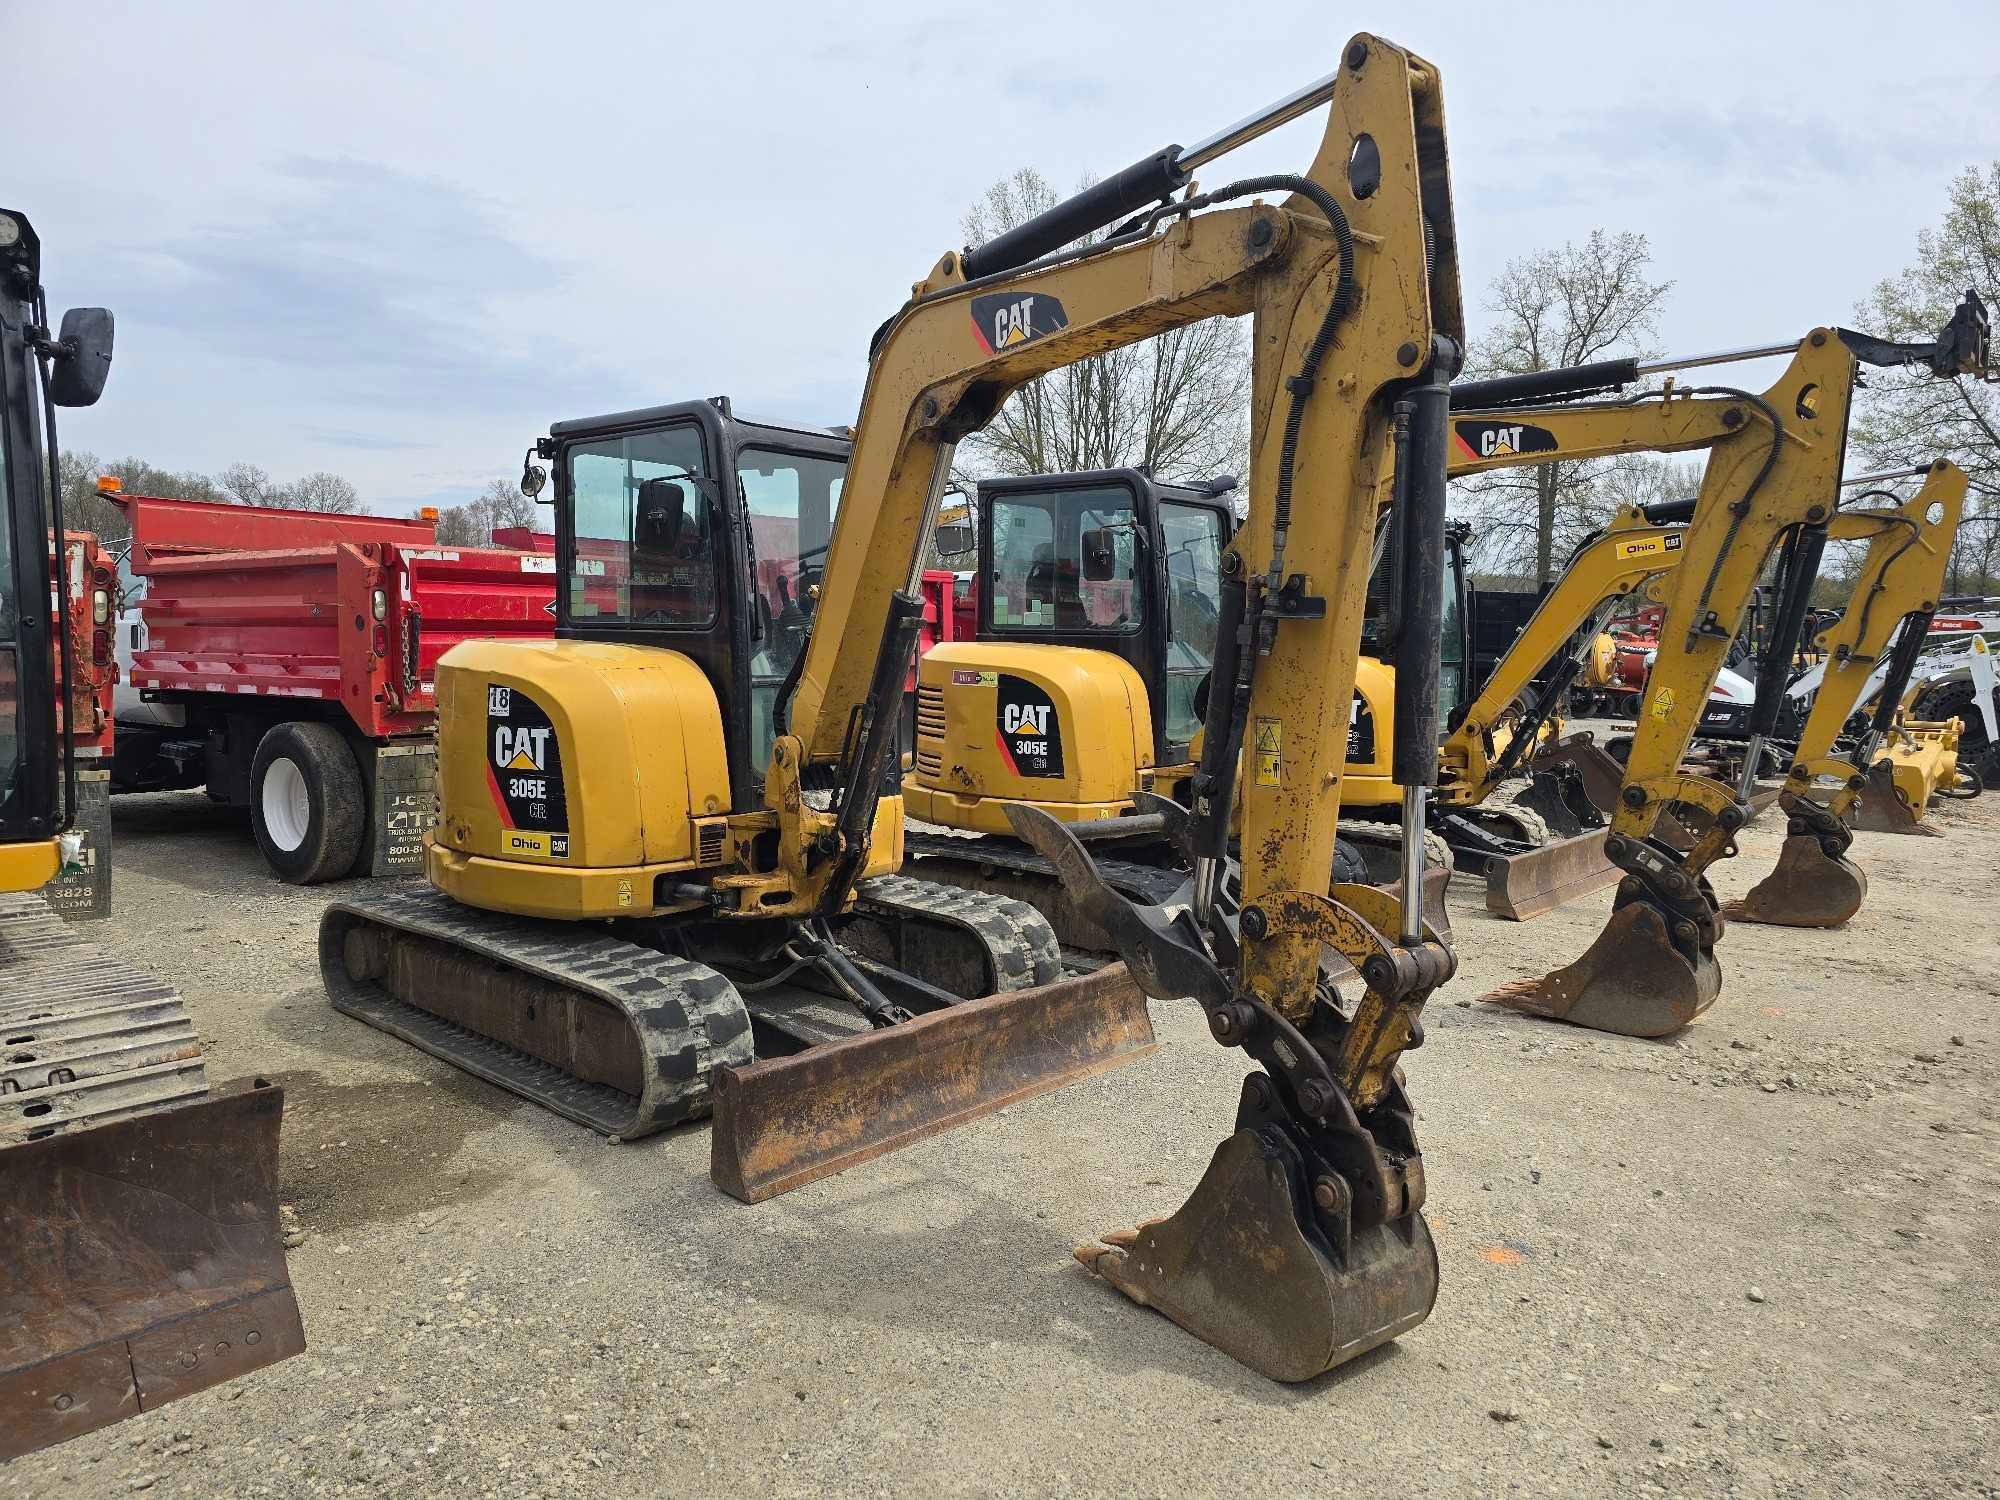 2014 CAT 305ECR HYDRAULIC EXCAVATOR SN:XFA03486 powered by Cat C2.4 diesel engine, equipped with